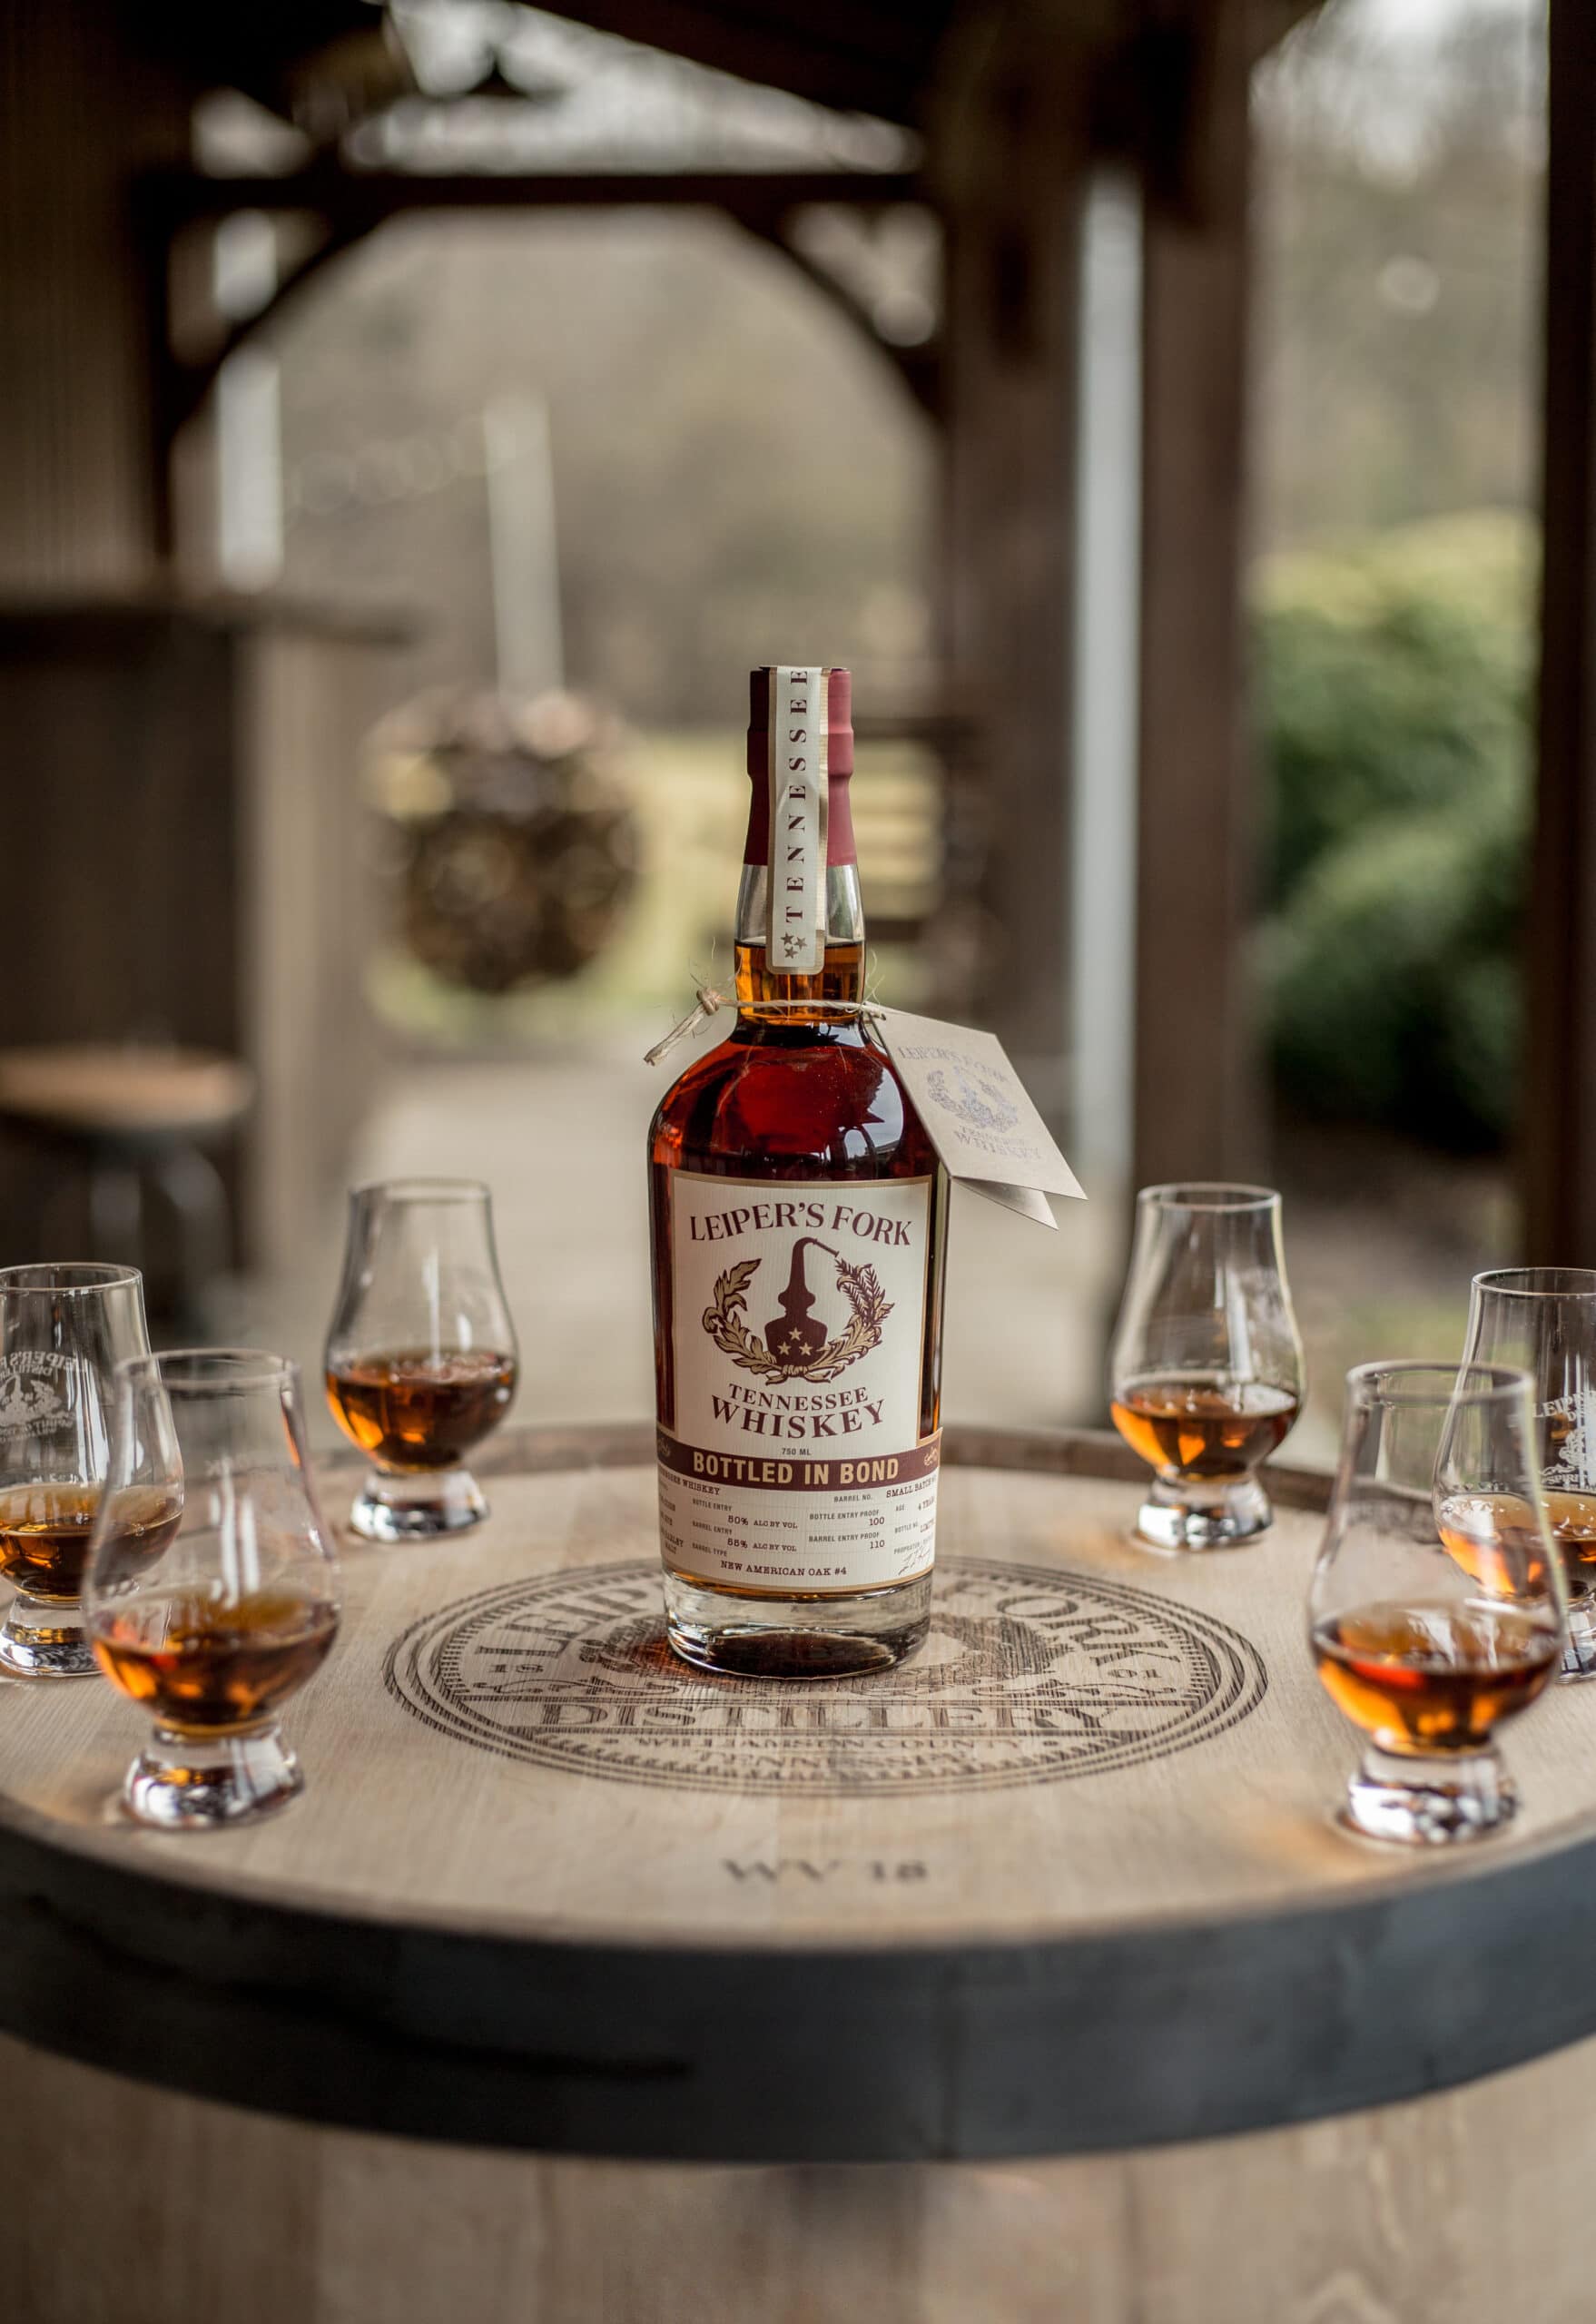 Tennessee whiskey at Leiper’s Fork Distillery in Franklin, Tennessee. Courtesy of Visit Franklin.